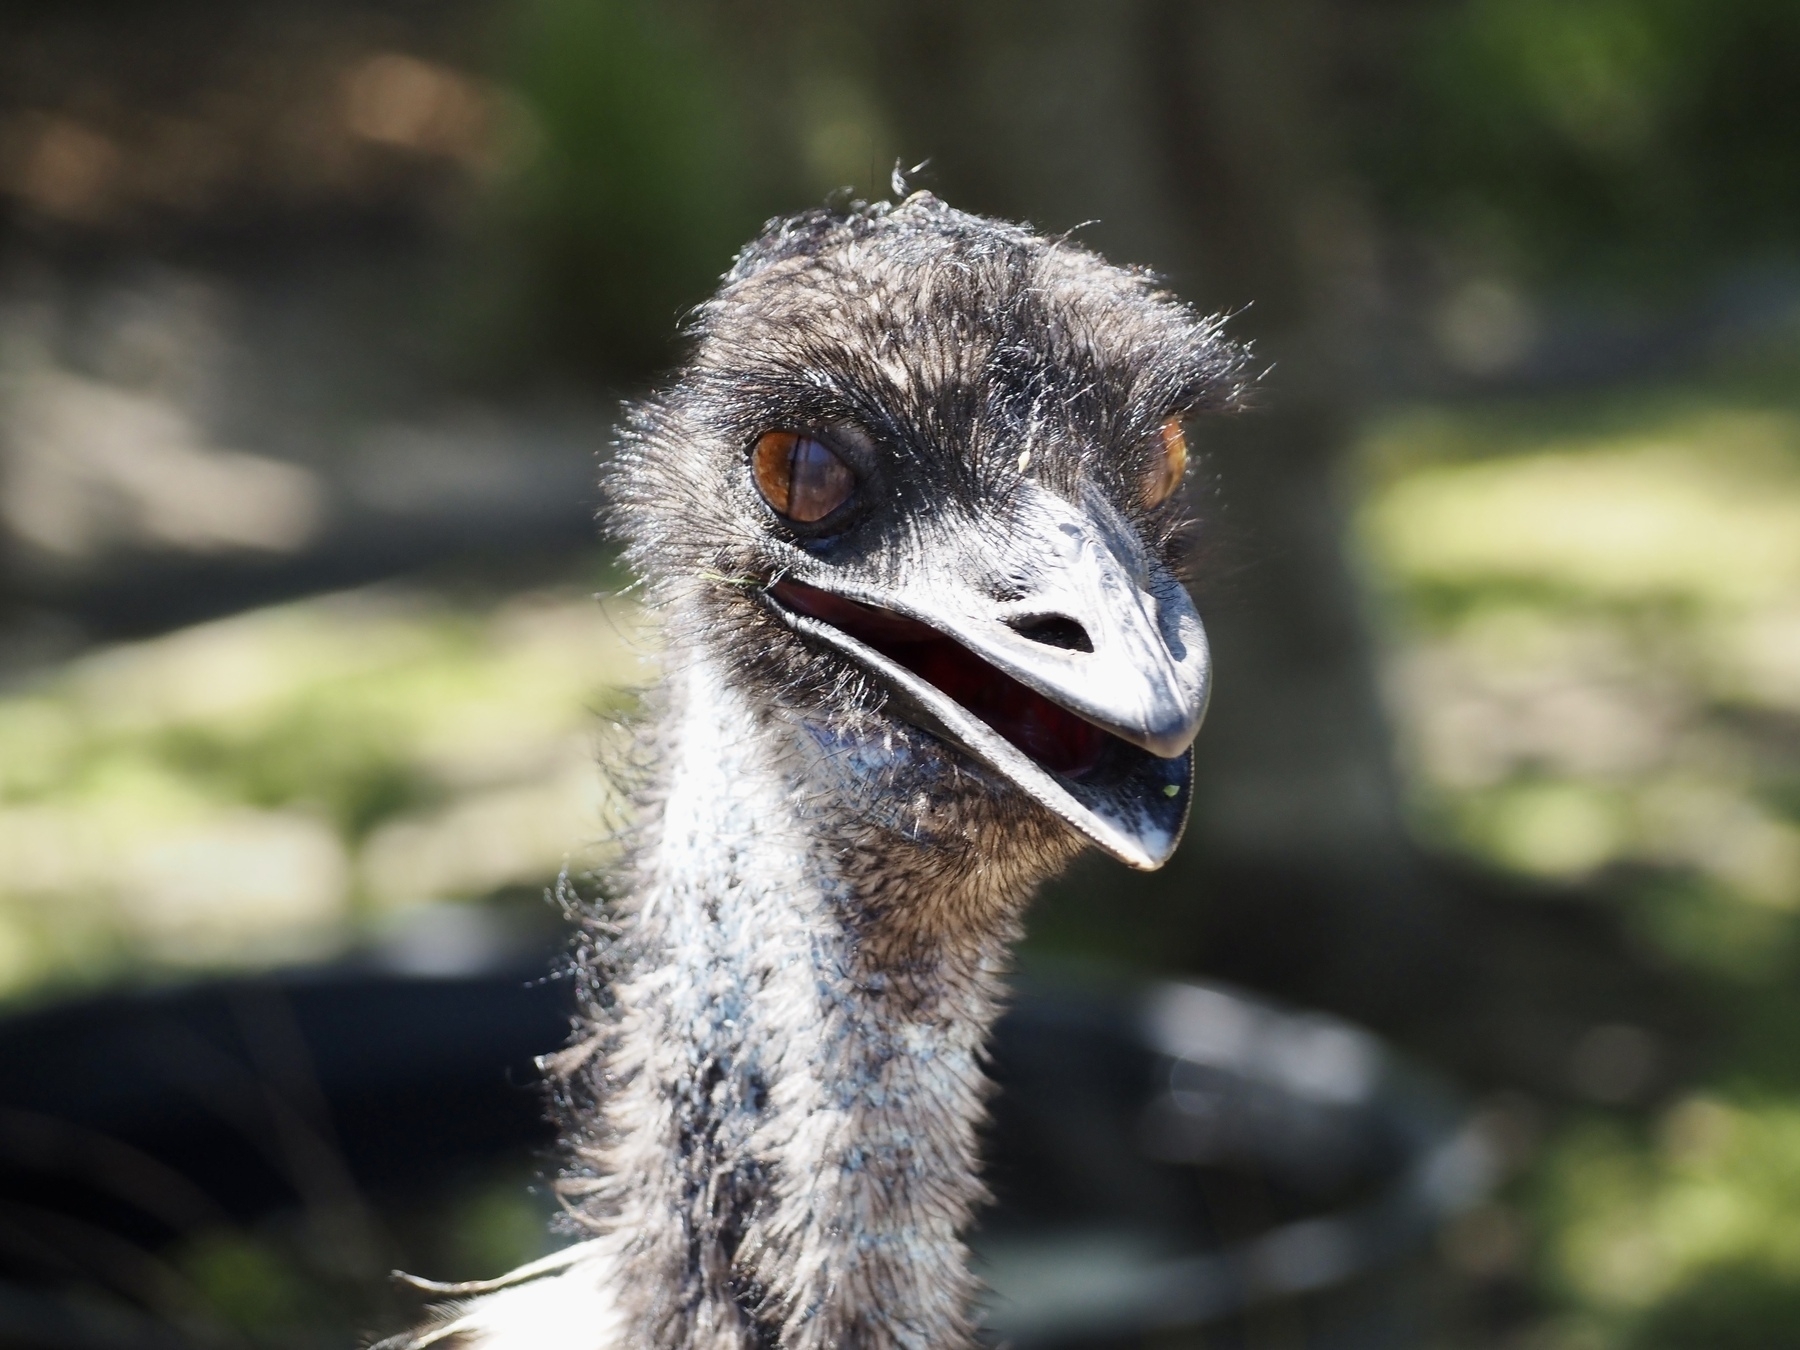 A wide-eyed emu looks beyond the frame.